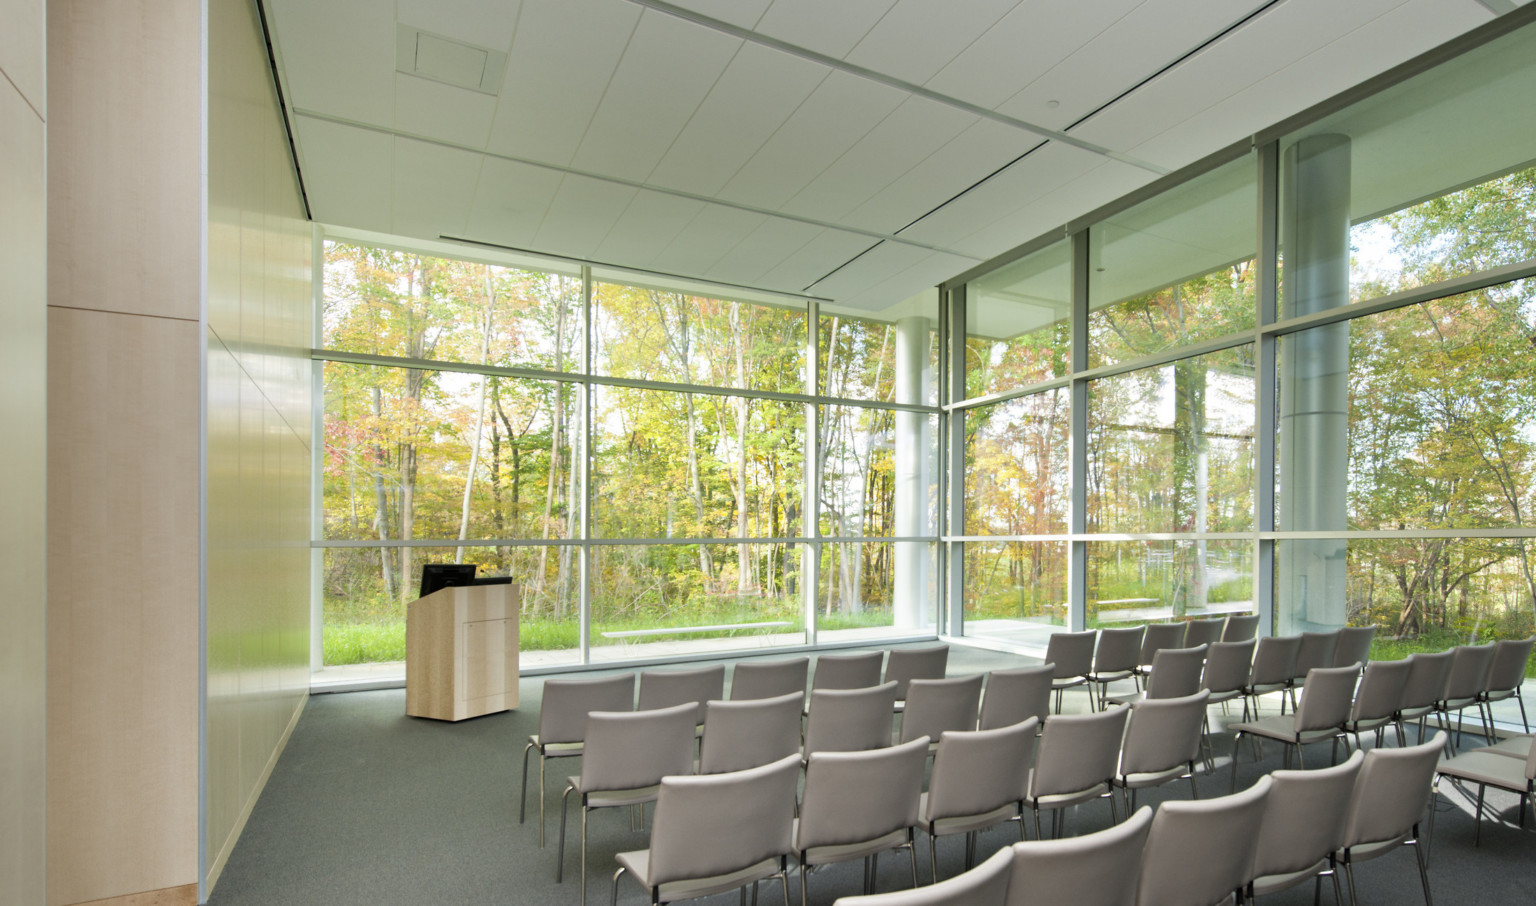 Auditorium with grey floor, wood left wall, and floor to ceiling windows on two walls with ground level view of trees.